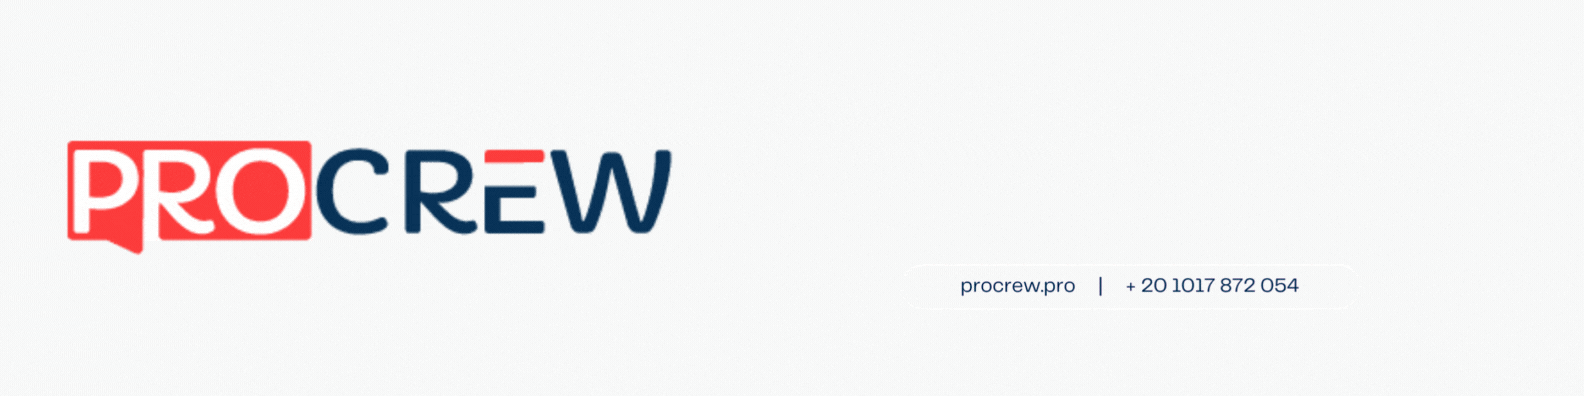 Grow your Business with ProCrew